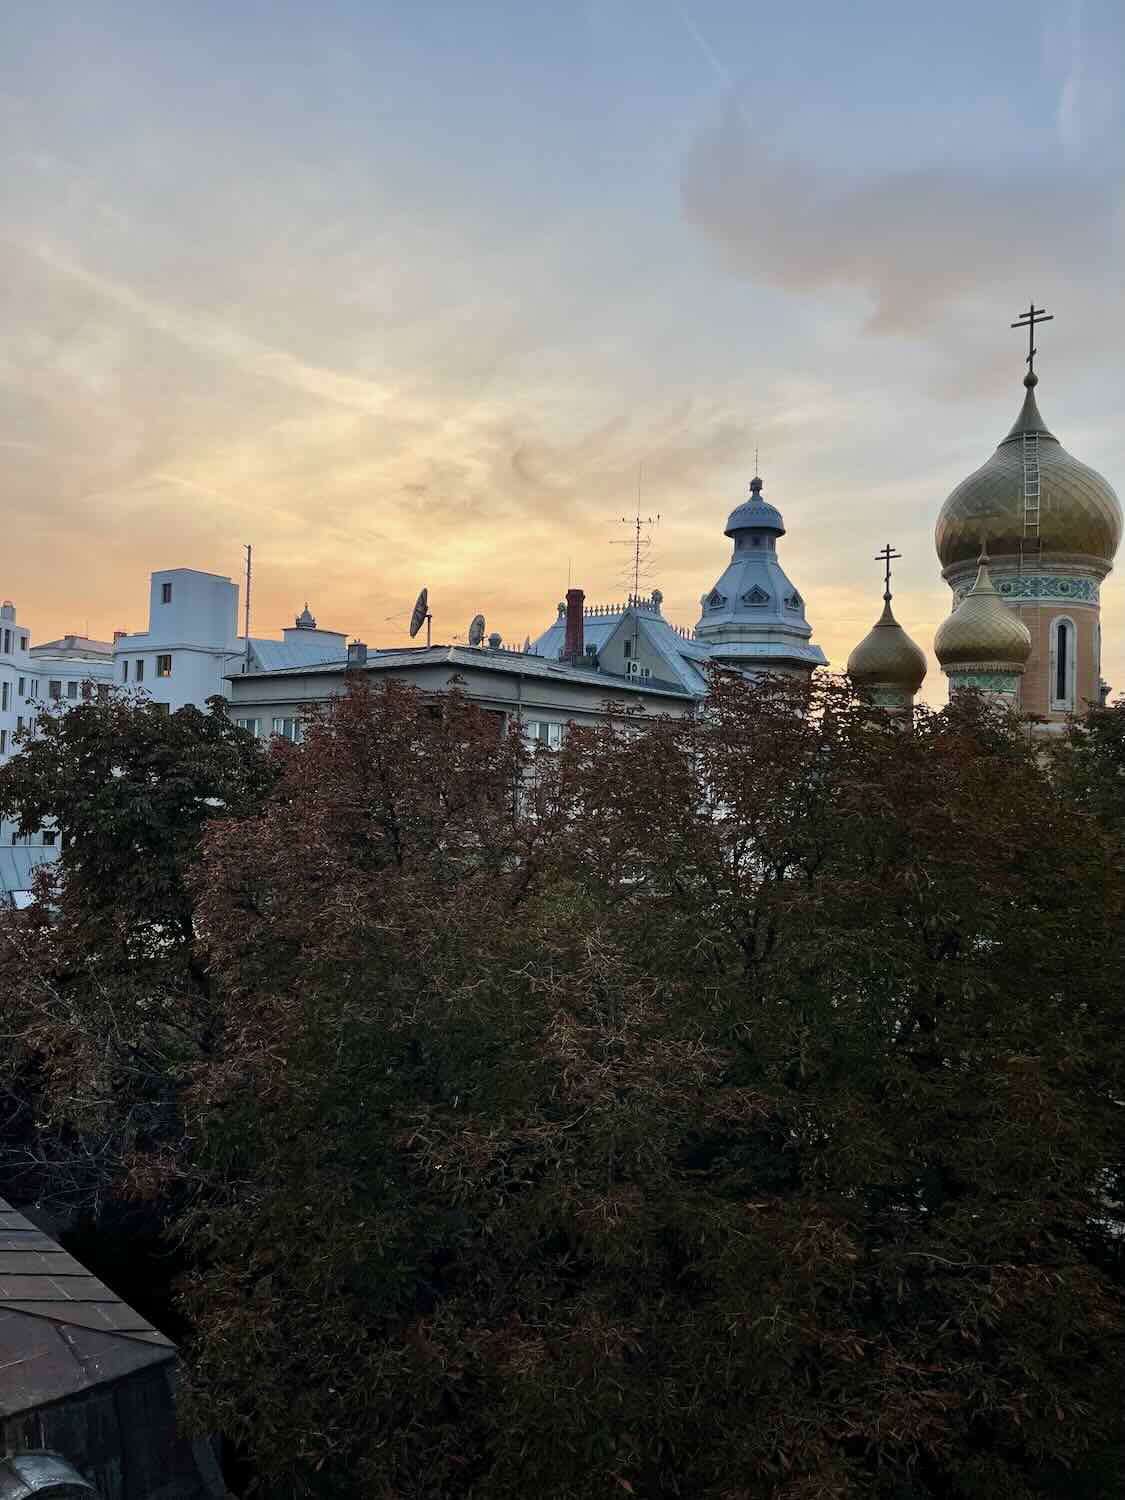 A sunset view over Bucharest, featuring silhouettes of buildings against a sky painted in shades of orange and blue, with the domes of a church adding a distinctive skyline.